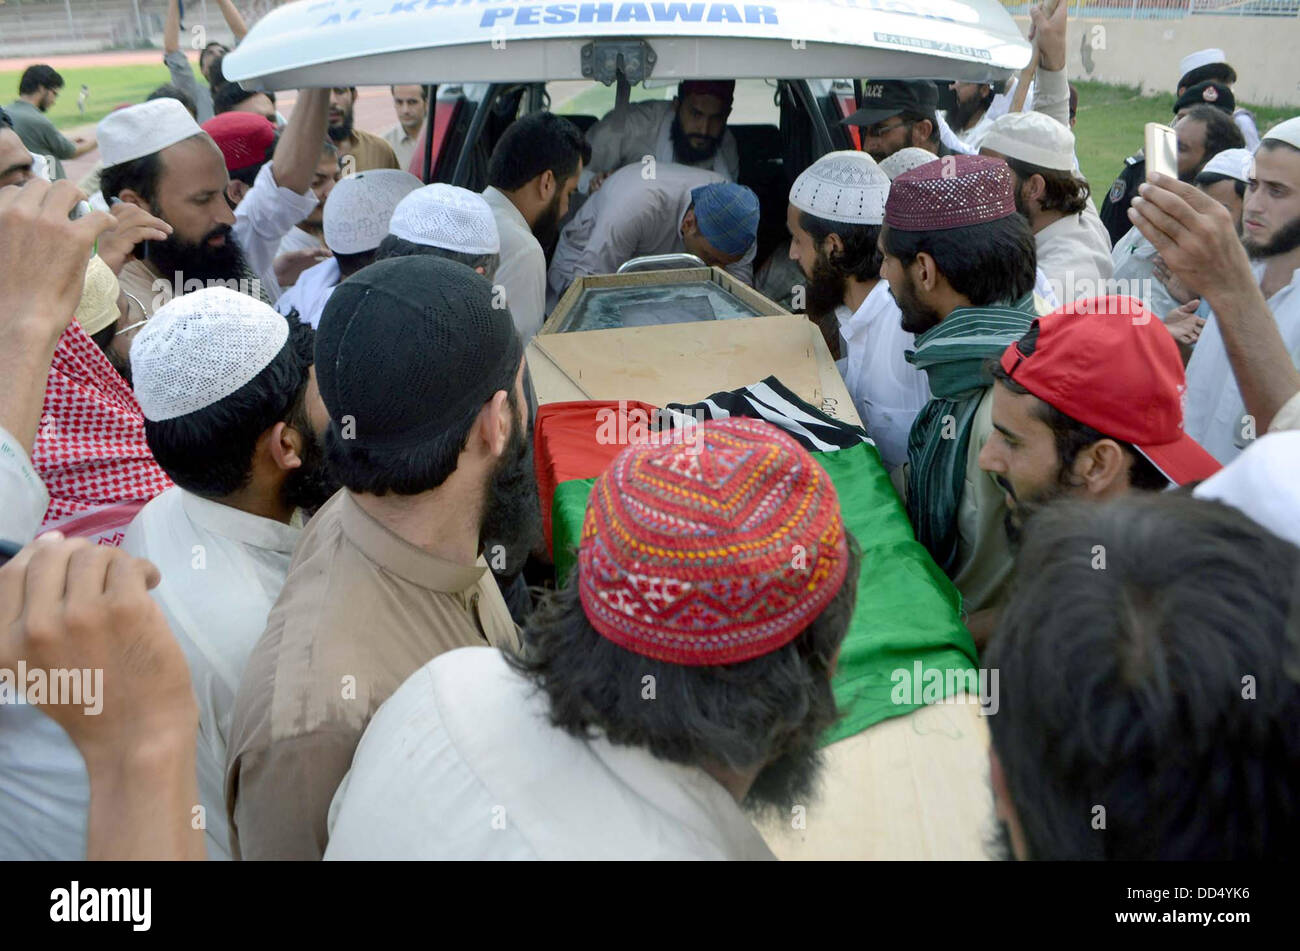 Activists of Ahle Sunnat Wal Jamat carry funeral of their leader and spokesman, Akbar Saeed Farooqi who gunned down by unidentified gunmen in Gulshan-e-Iqbal on Sunday in Karachi, on Qayyum Stadium in Peshawar on Monday, August 26, 2013. Stock Photo